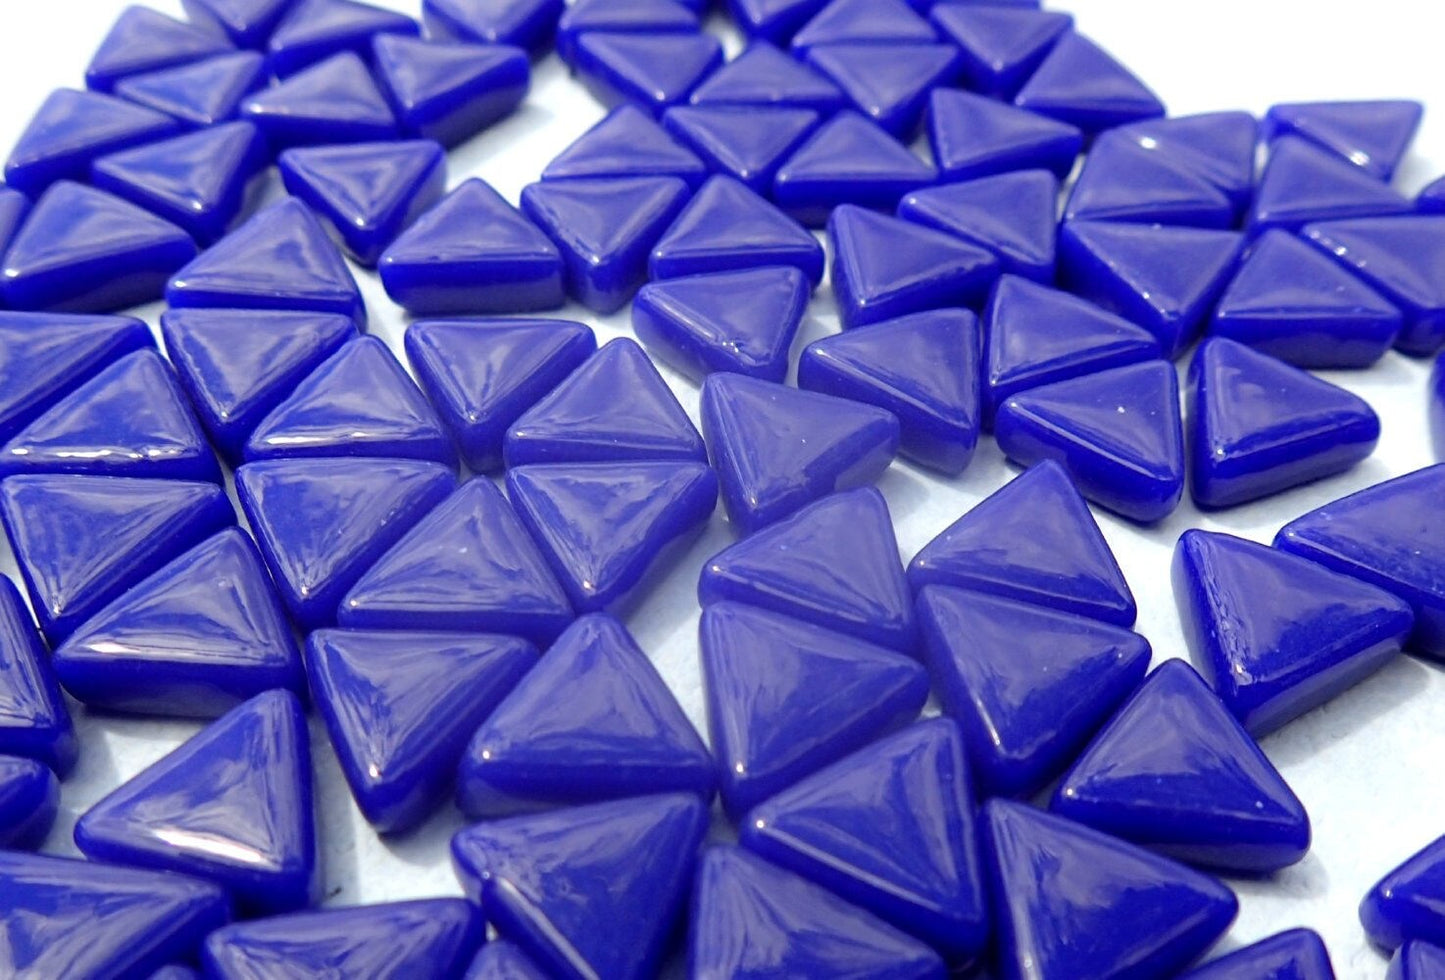 Small Blue Triangle Glass Mosaic Tiles - 10mm - Opaque Glass Solid Color - 50g of Triangles in Royal Blue